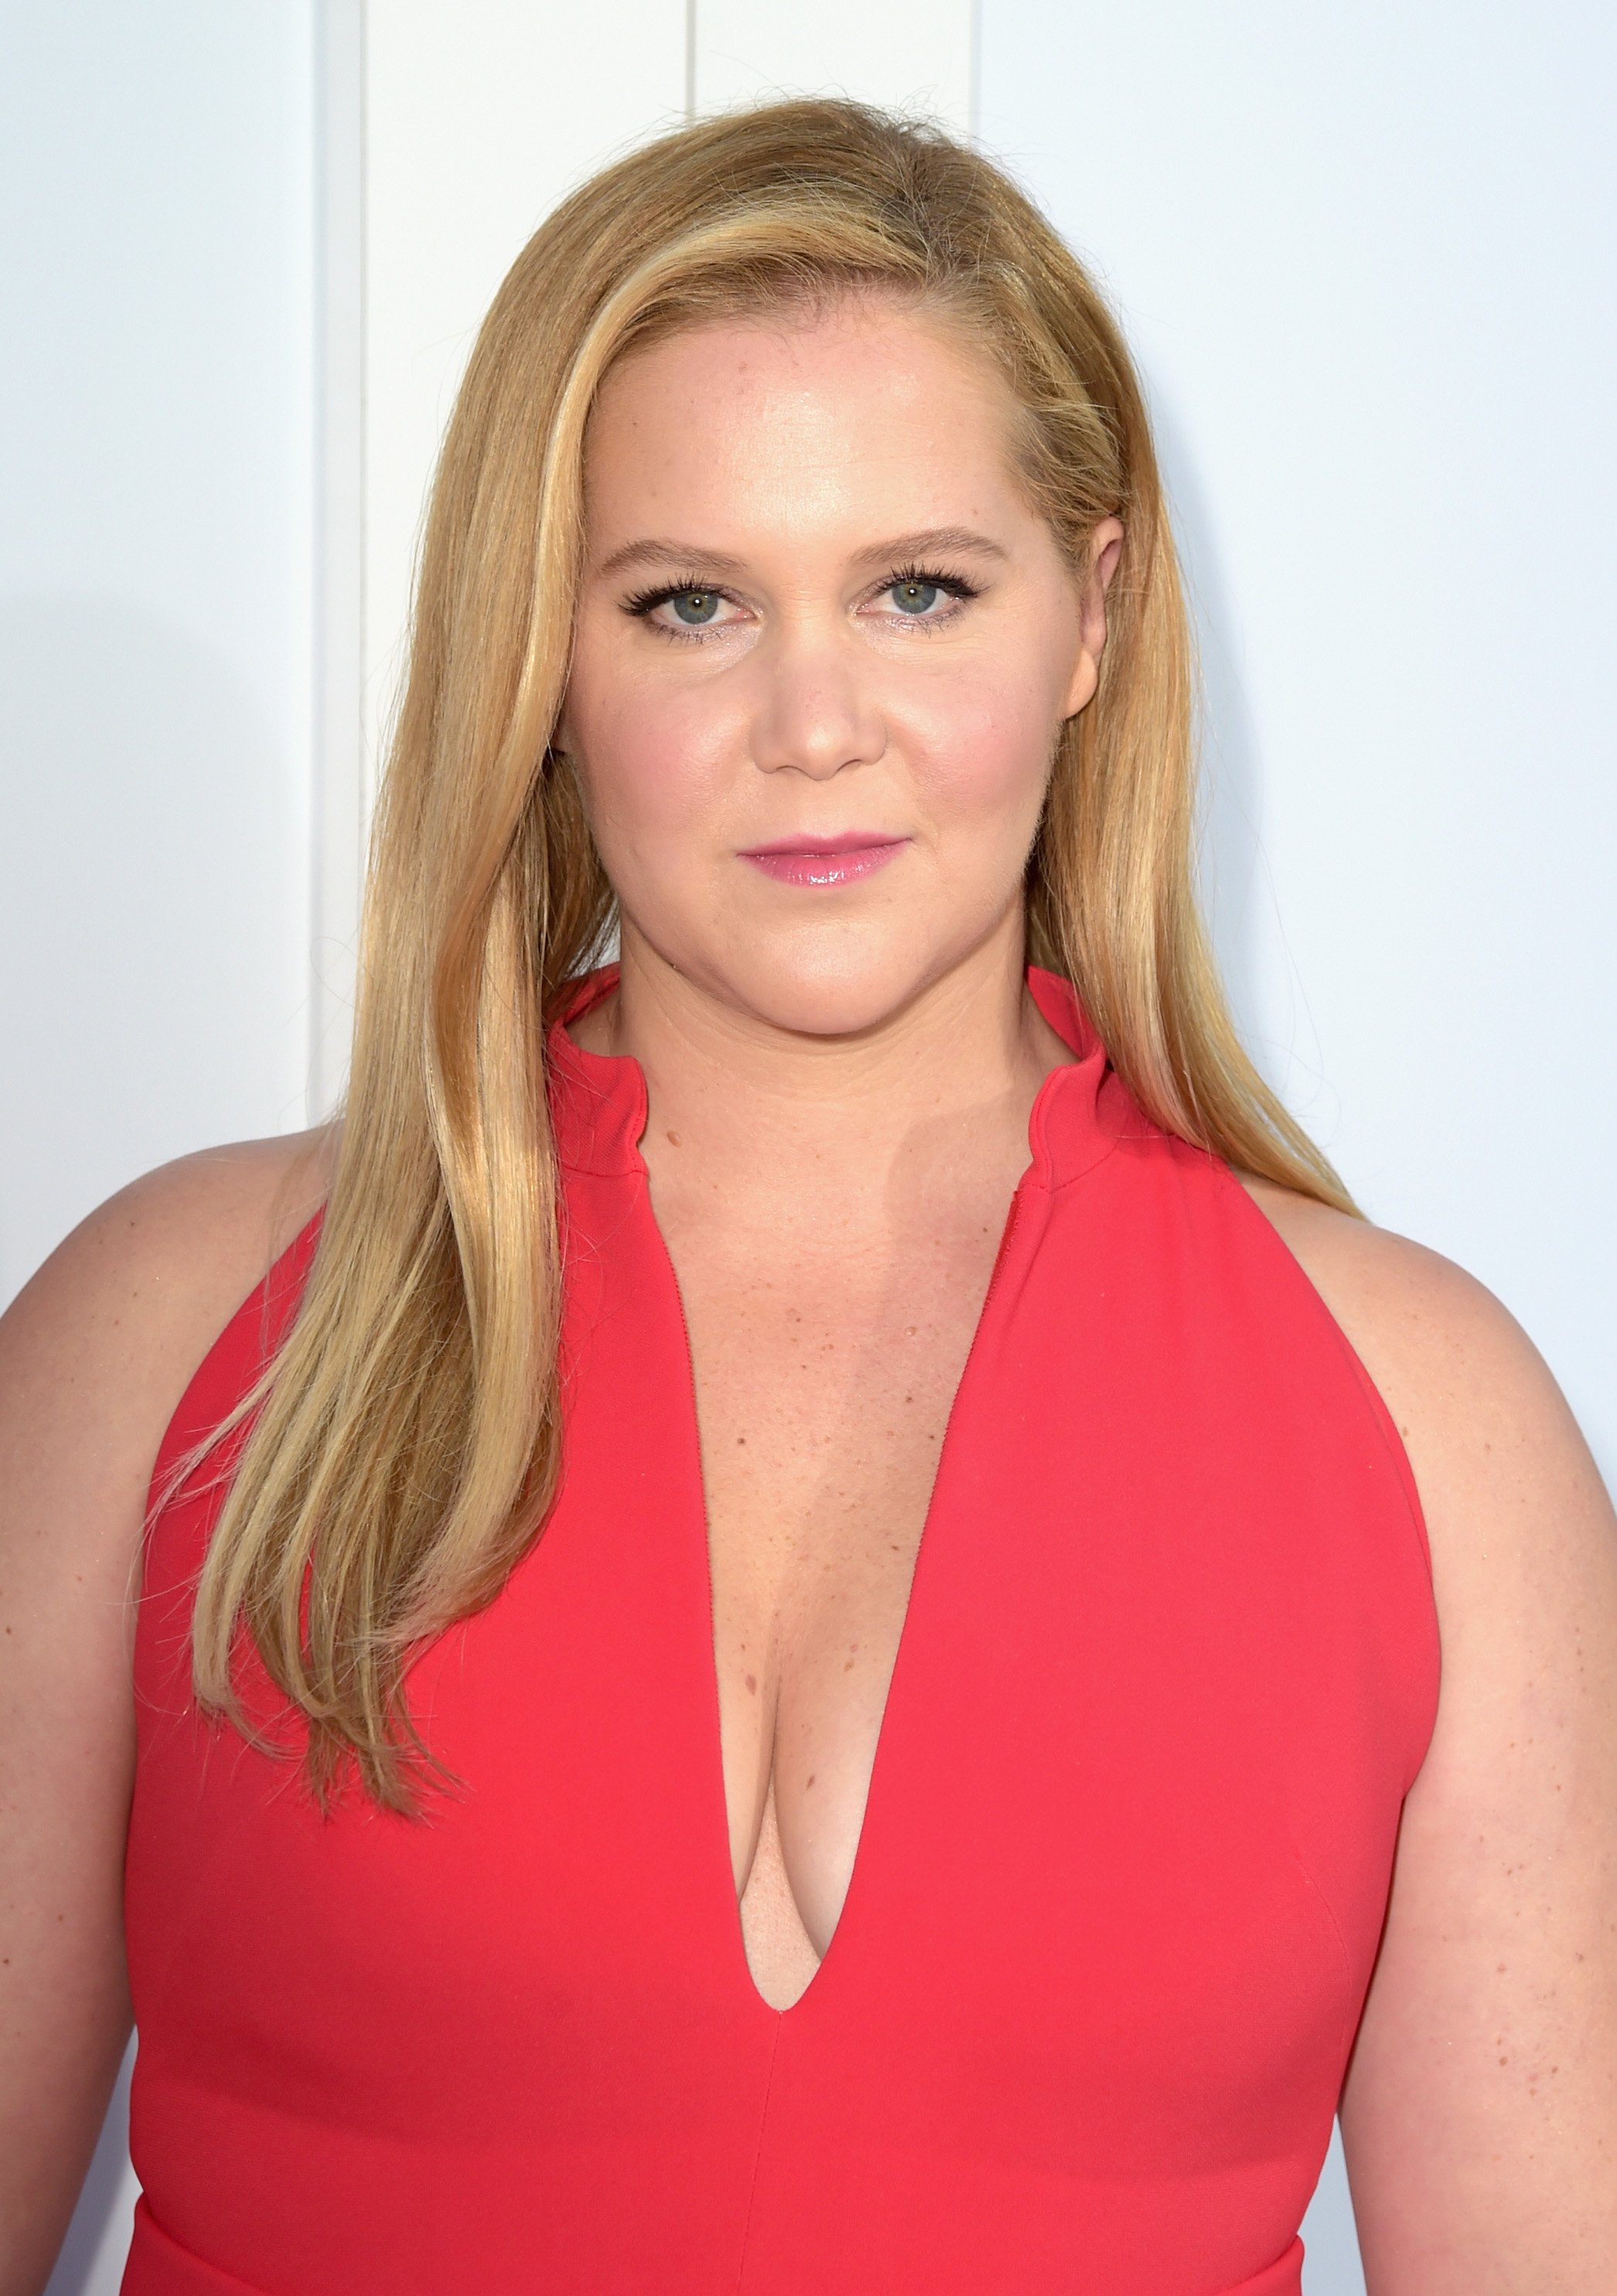 Amy Schumer attends the premiere of "I Feel Pretty" on April 17, 2018, in Westwood, California. | Source: Getty Images.